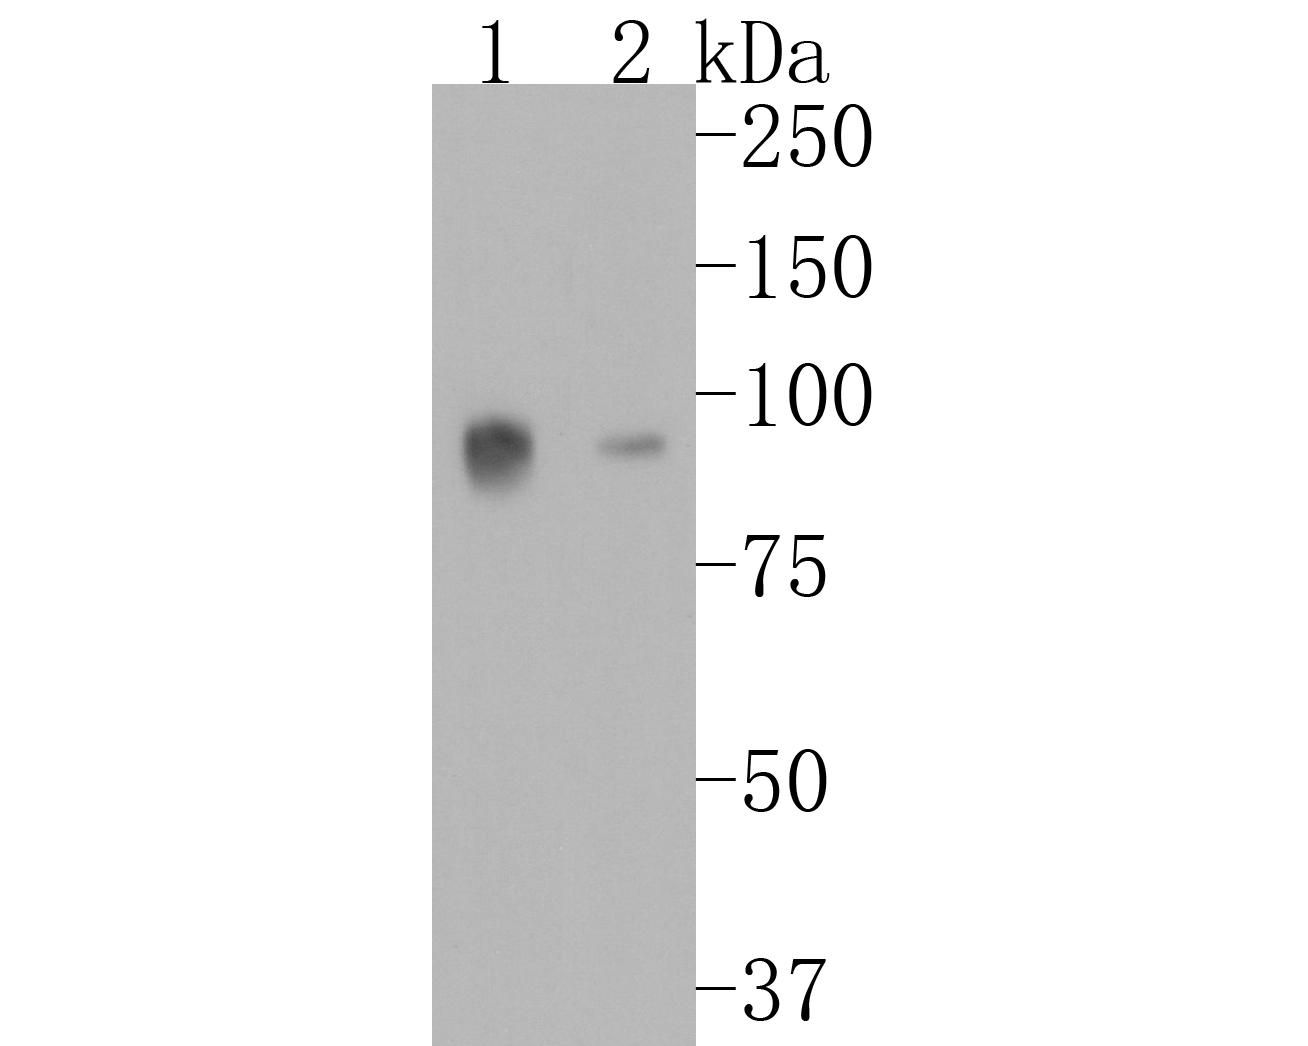 Western blot analysis of CD36 on different lysates. Proteins were transferred to a PVDF membrane and blocked with 5% BSA in PBS for 1 hour at room temperature. The primary antibody (ET1701-24, 1/500) was used in 5% BSA at room temperature for 2 hours. Goat Anti-Rabbit IgG - HRP Secondary Antibody (HA1001) at 1:5,000 dilution was used for 1 hour at room temperature.<br />
Positive control: <br />
Lane 1: Human heart tissue lysate<br />
Lane 2: Mouse heart tissue lysate